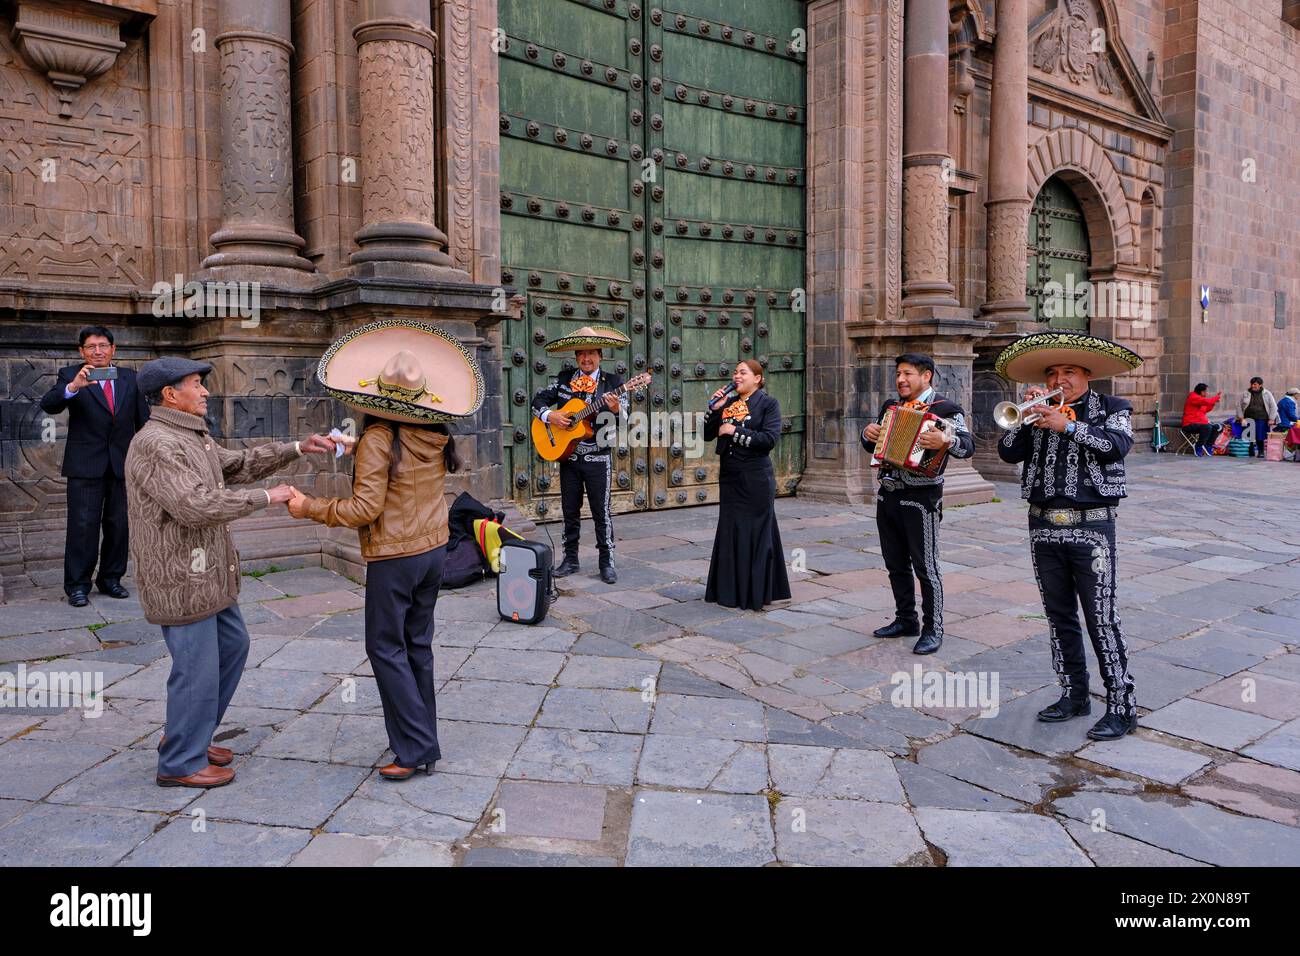 Peru, province of Cuzco, Cuzco, listed as a UNESCO World Heritage Site, Plaza de Armas, group of musicians in front of the cathedral Stock Photo